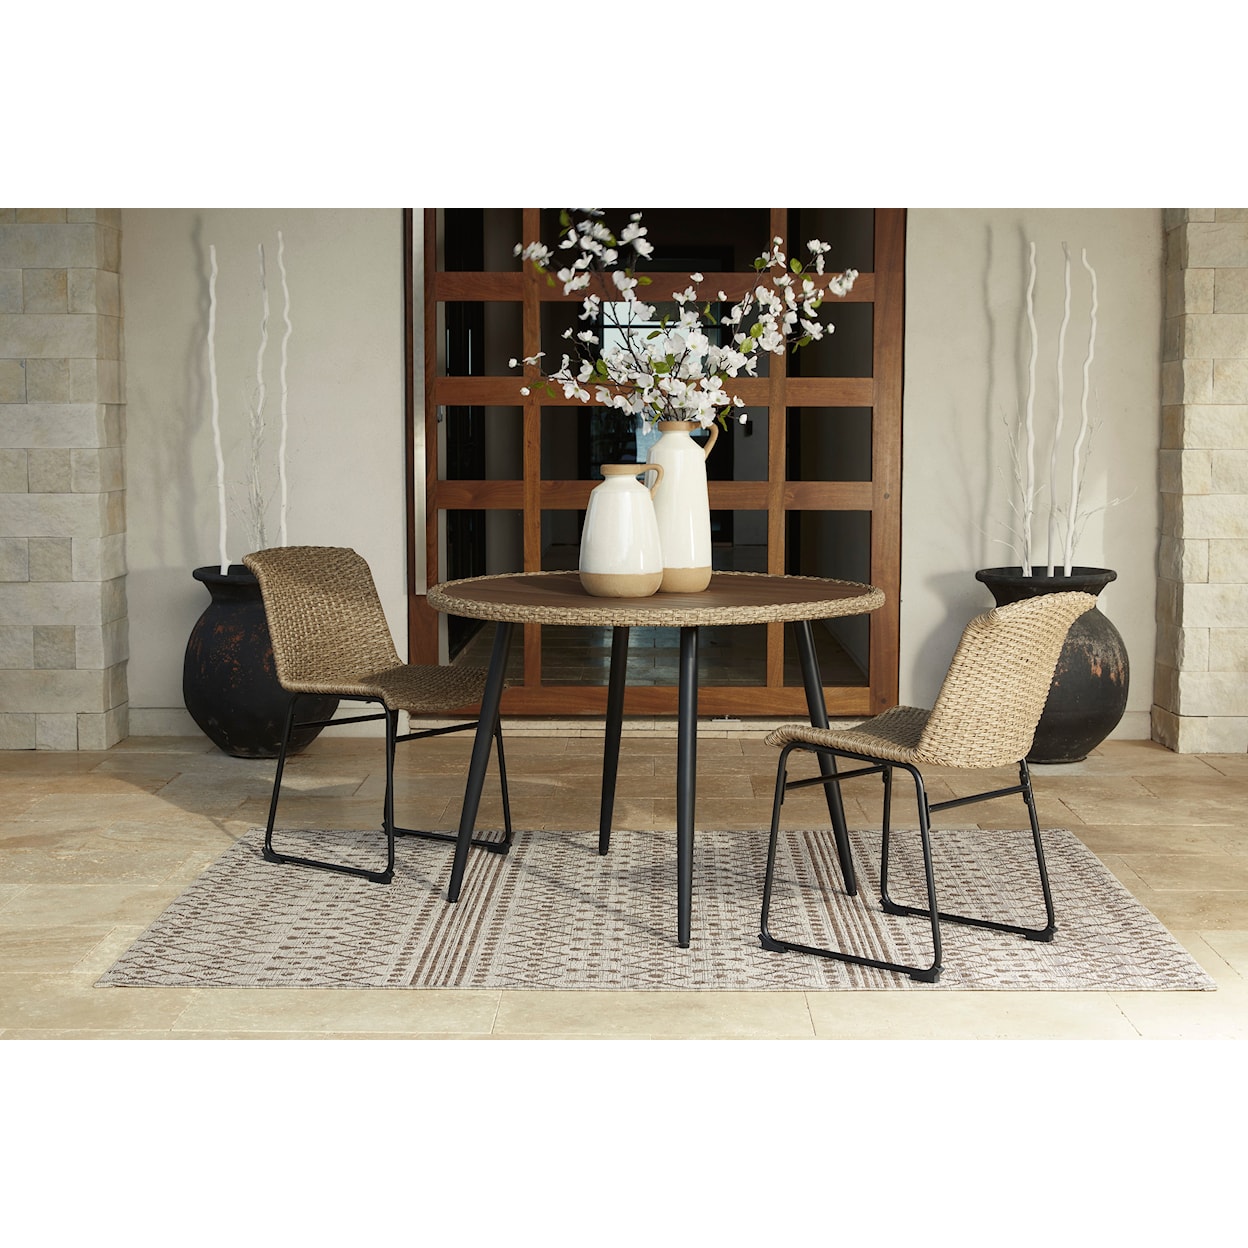 Signature Design by Ashley Amaris Set of 2 Outdoor Dining Chairs